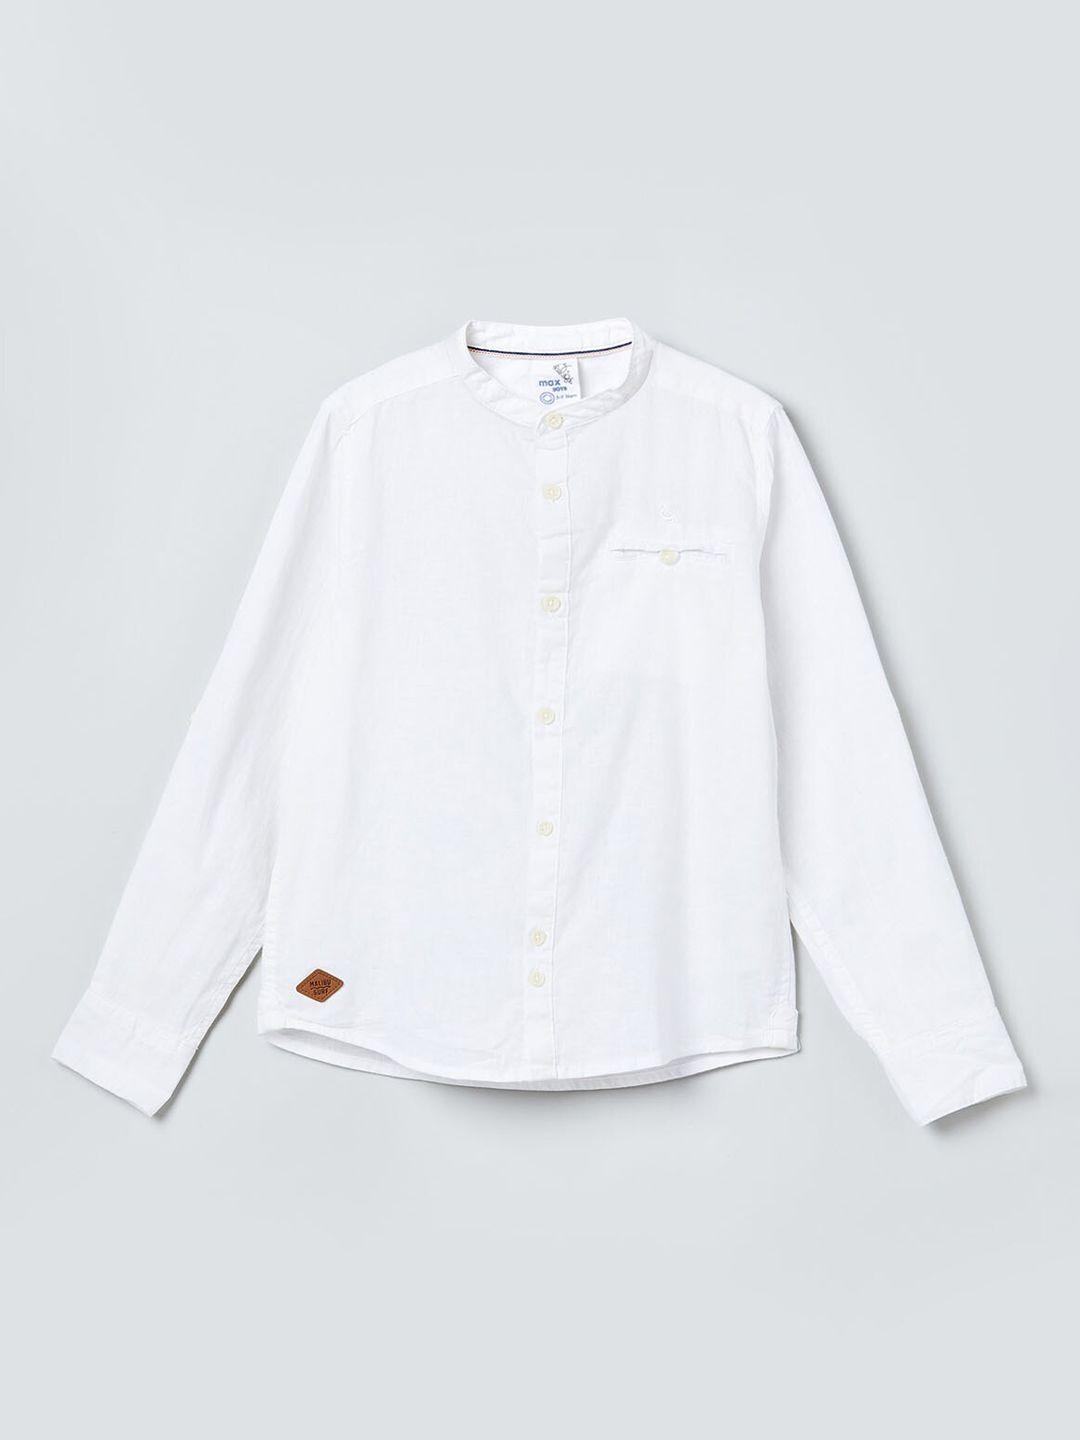 max-boys-off-white-solid-casual-shirt